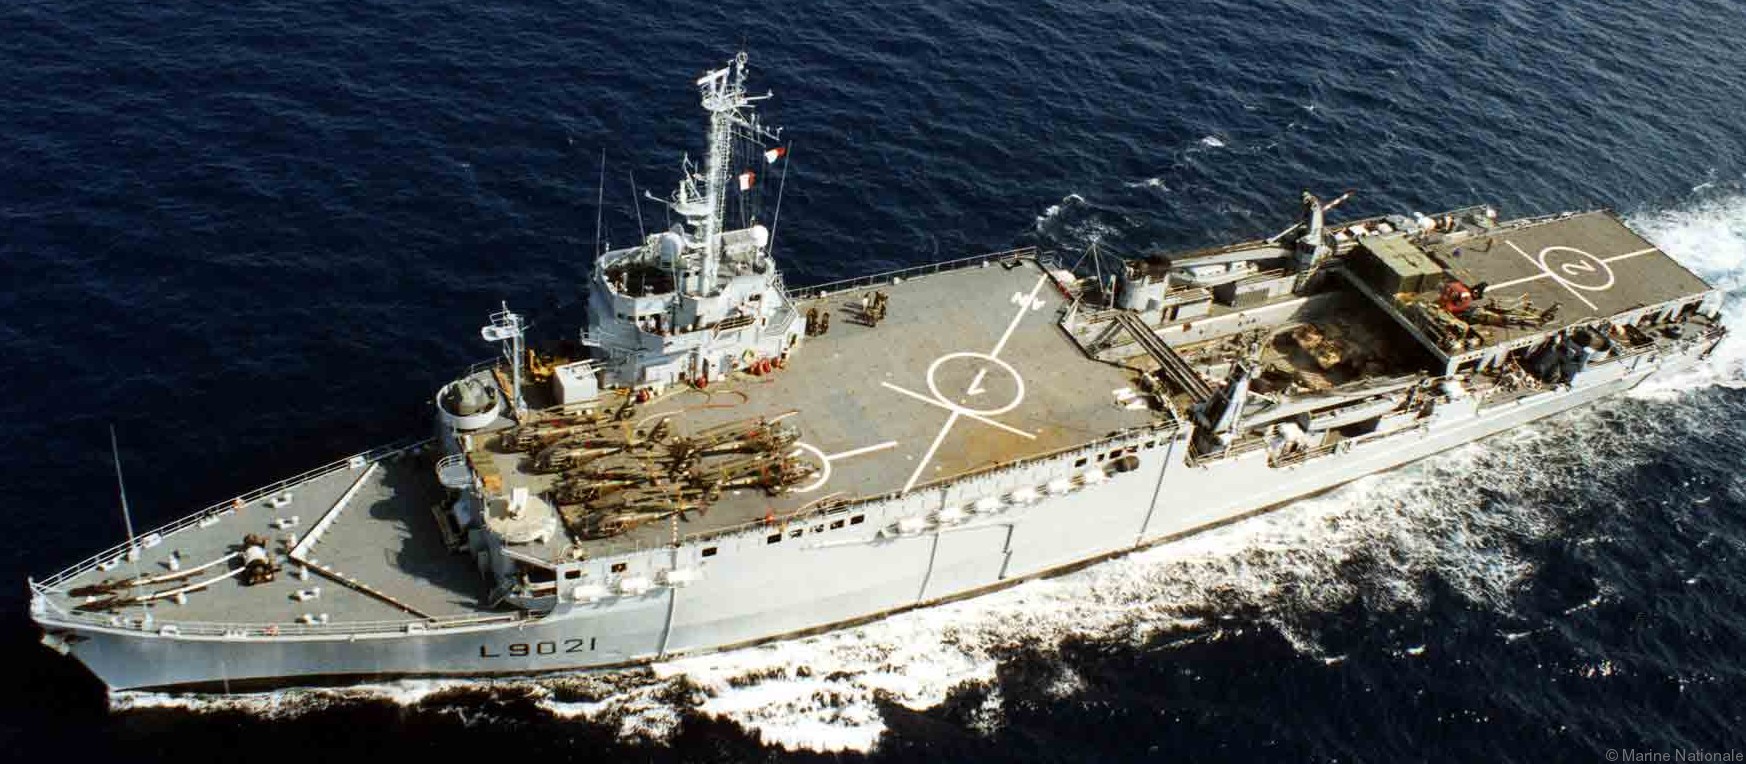 l-9021 ouragan amphibious dock landing ship lpd tcd french navy marine nationale 03